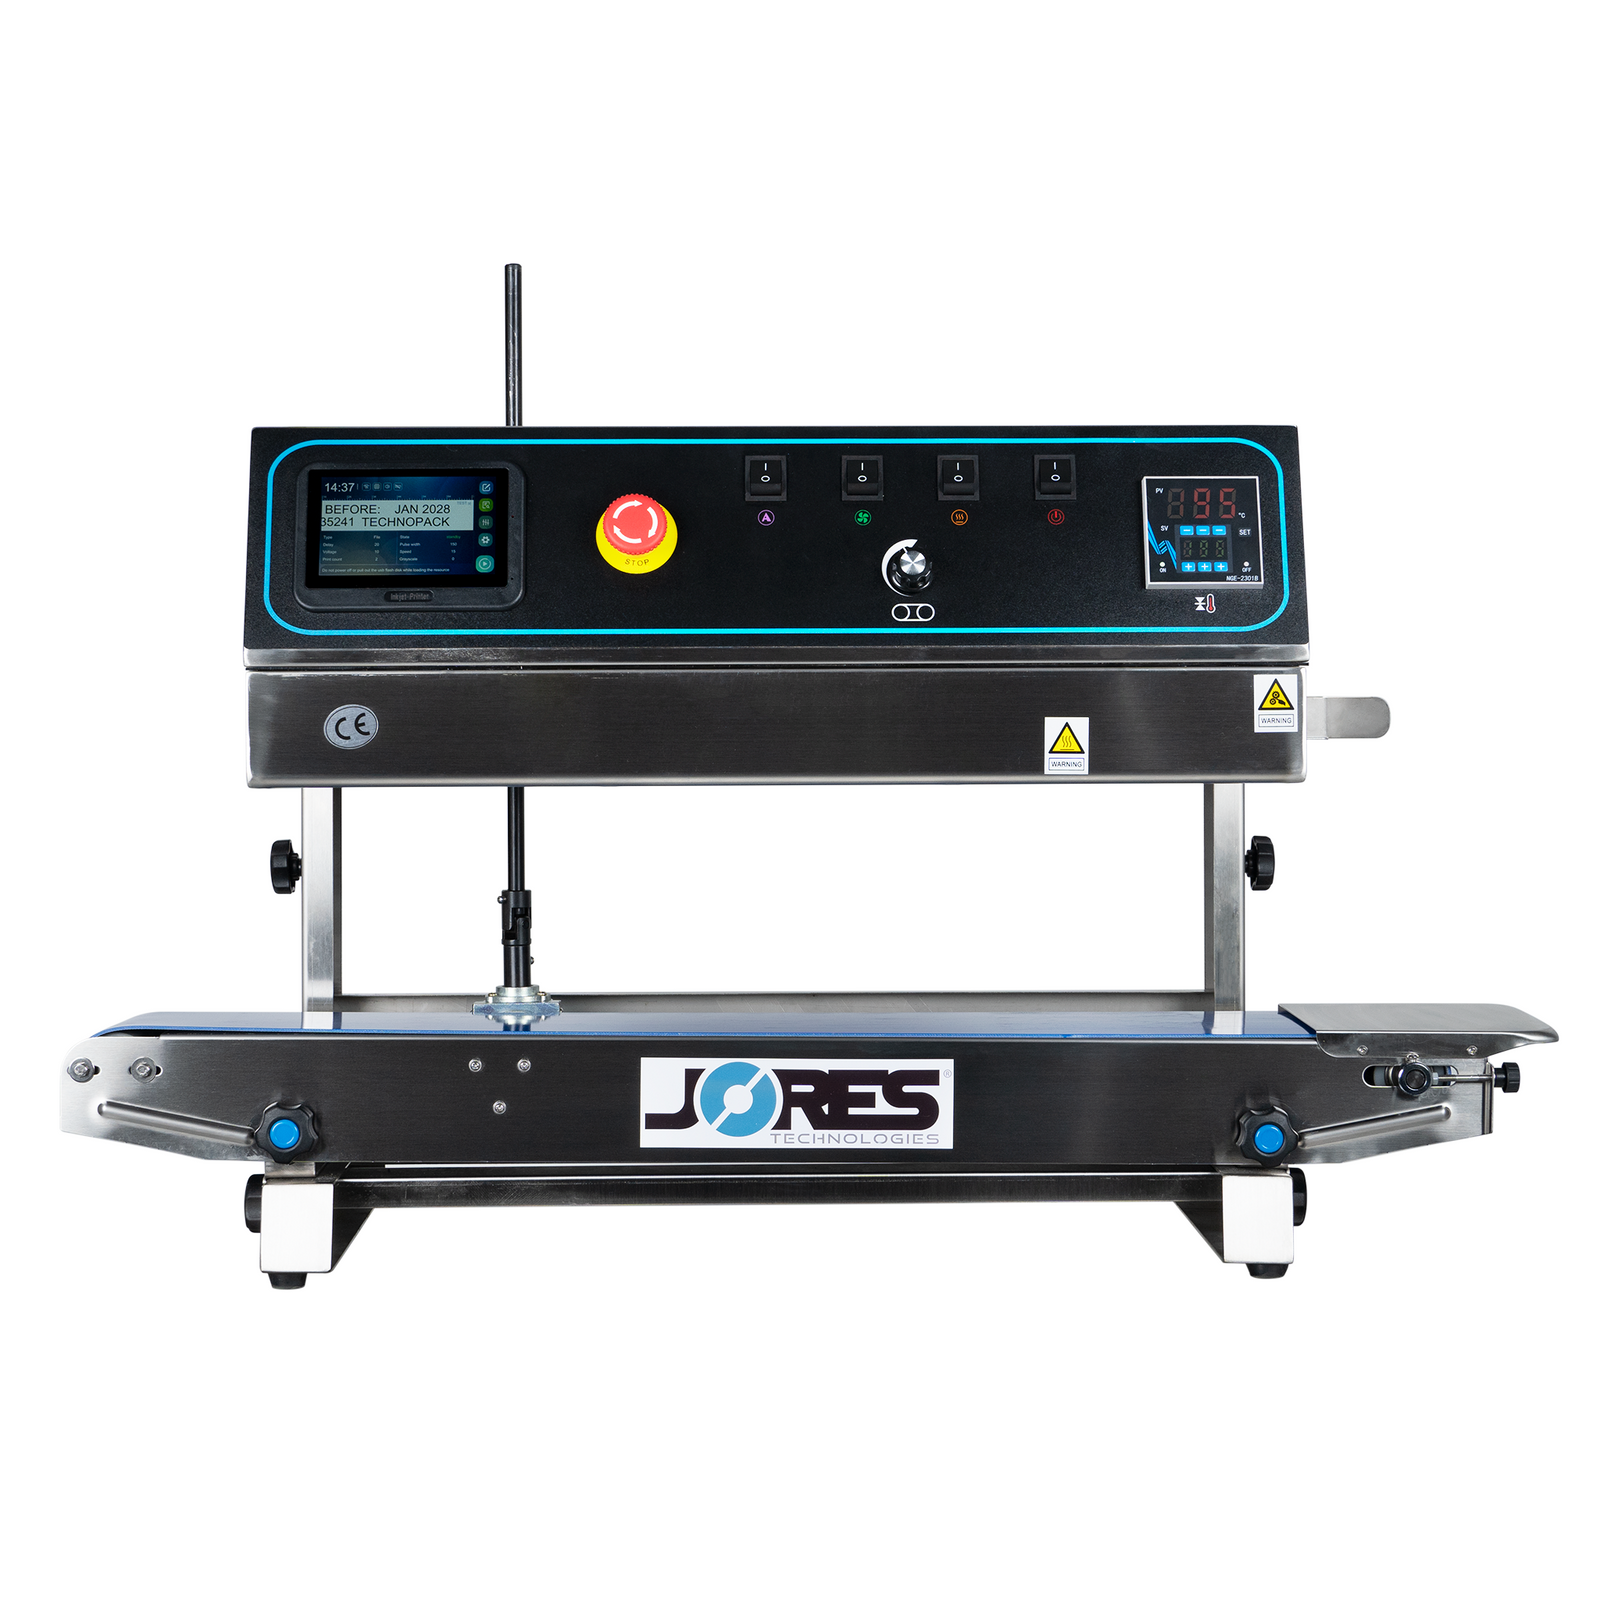 Continuous Band Sealer with TIJ Printer for vertical applications